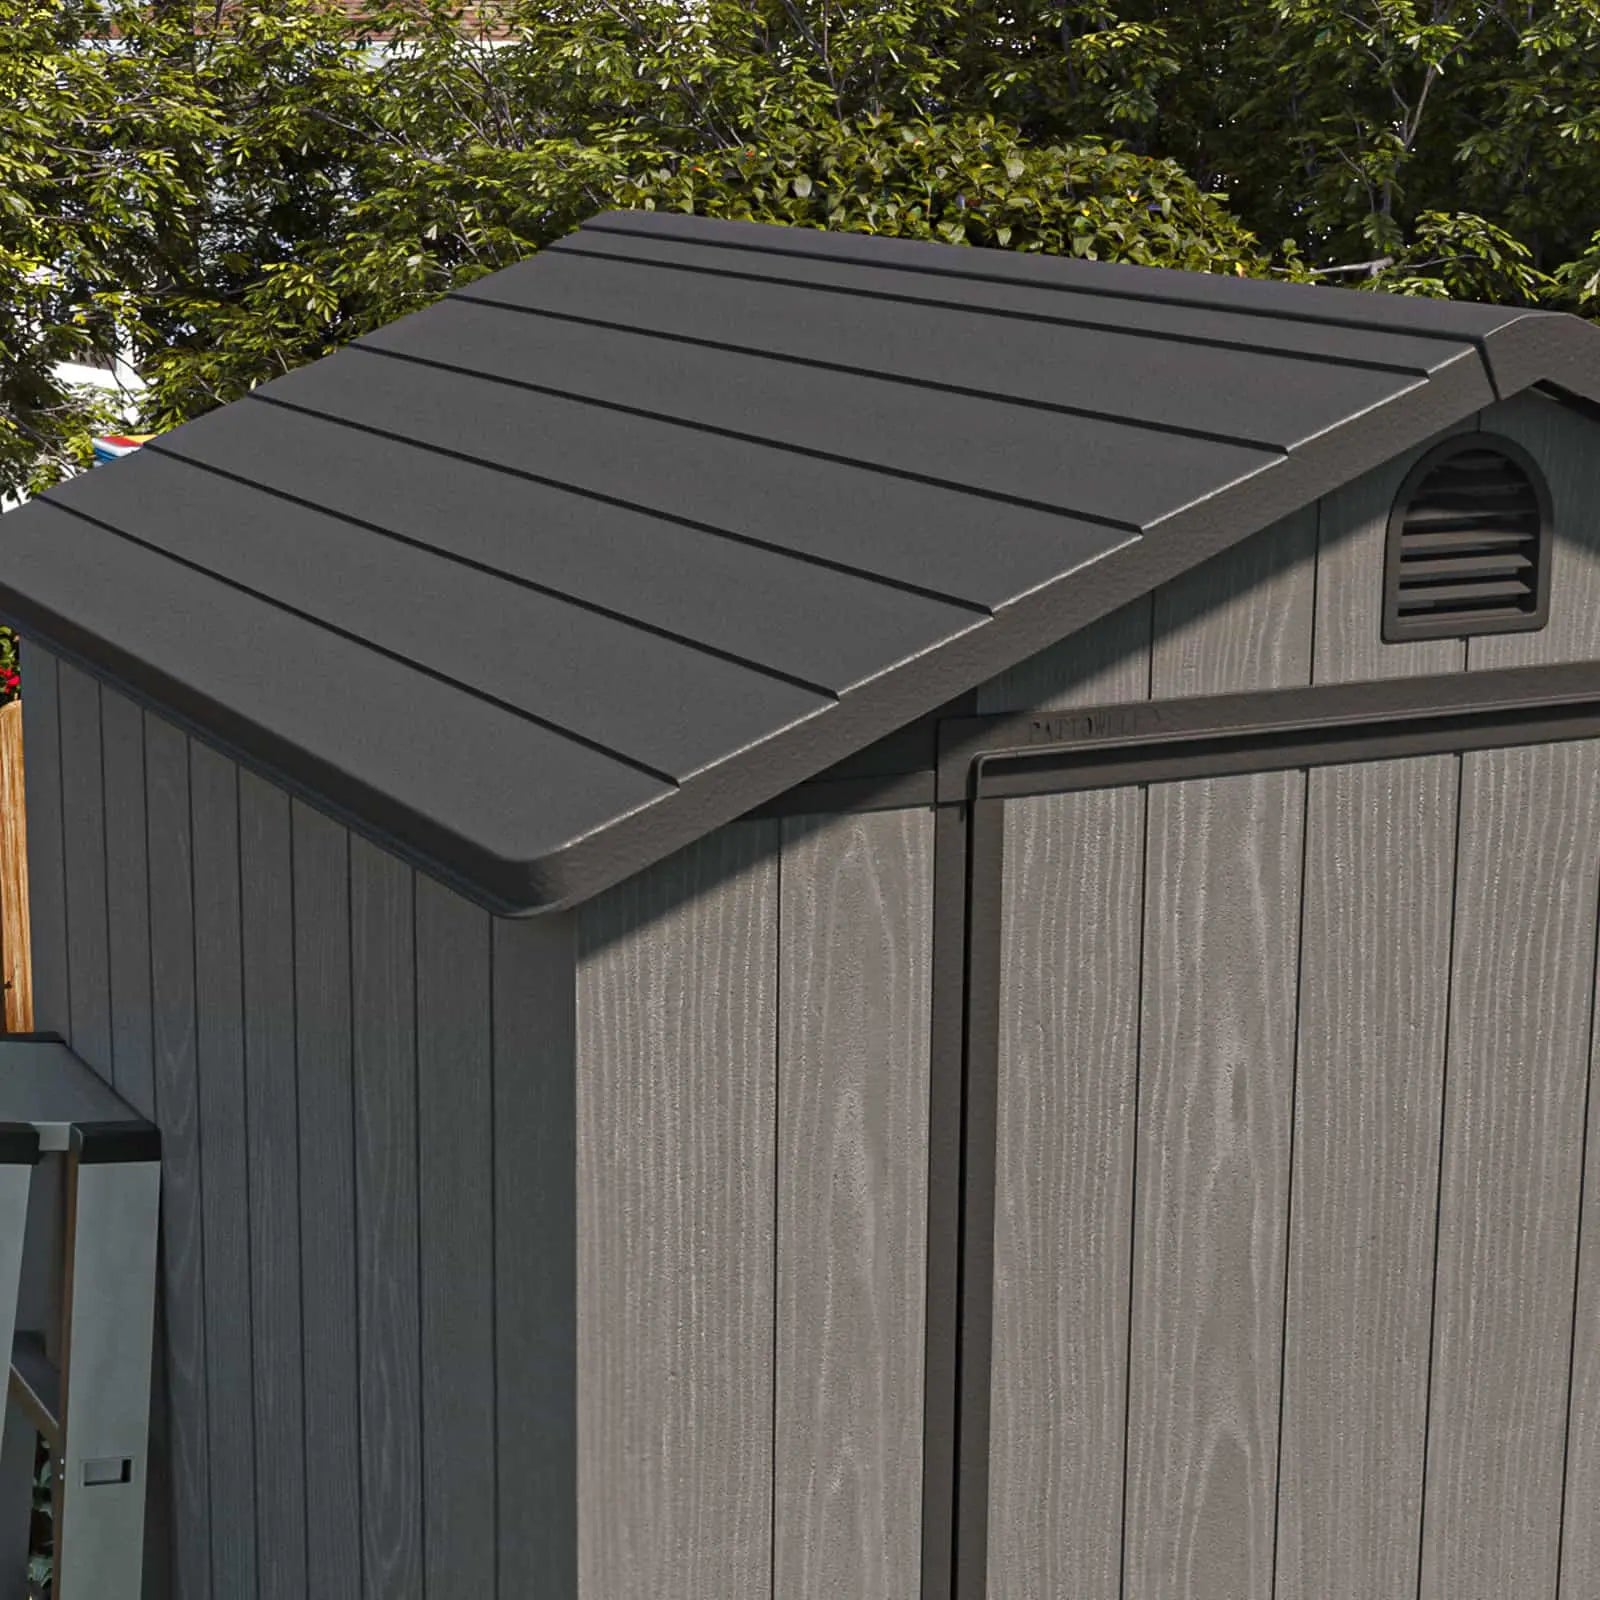 Patiowell 4x4 Plastic Storage Shed Pro-Roof